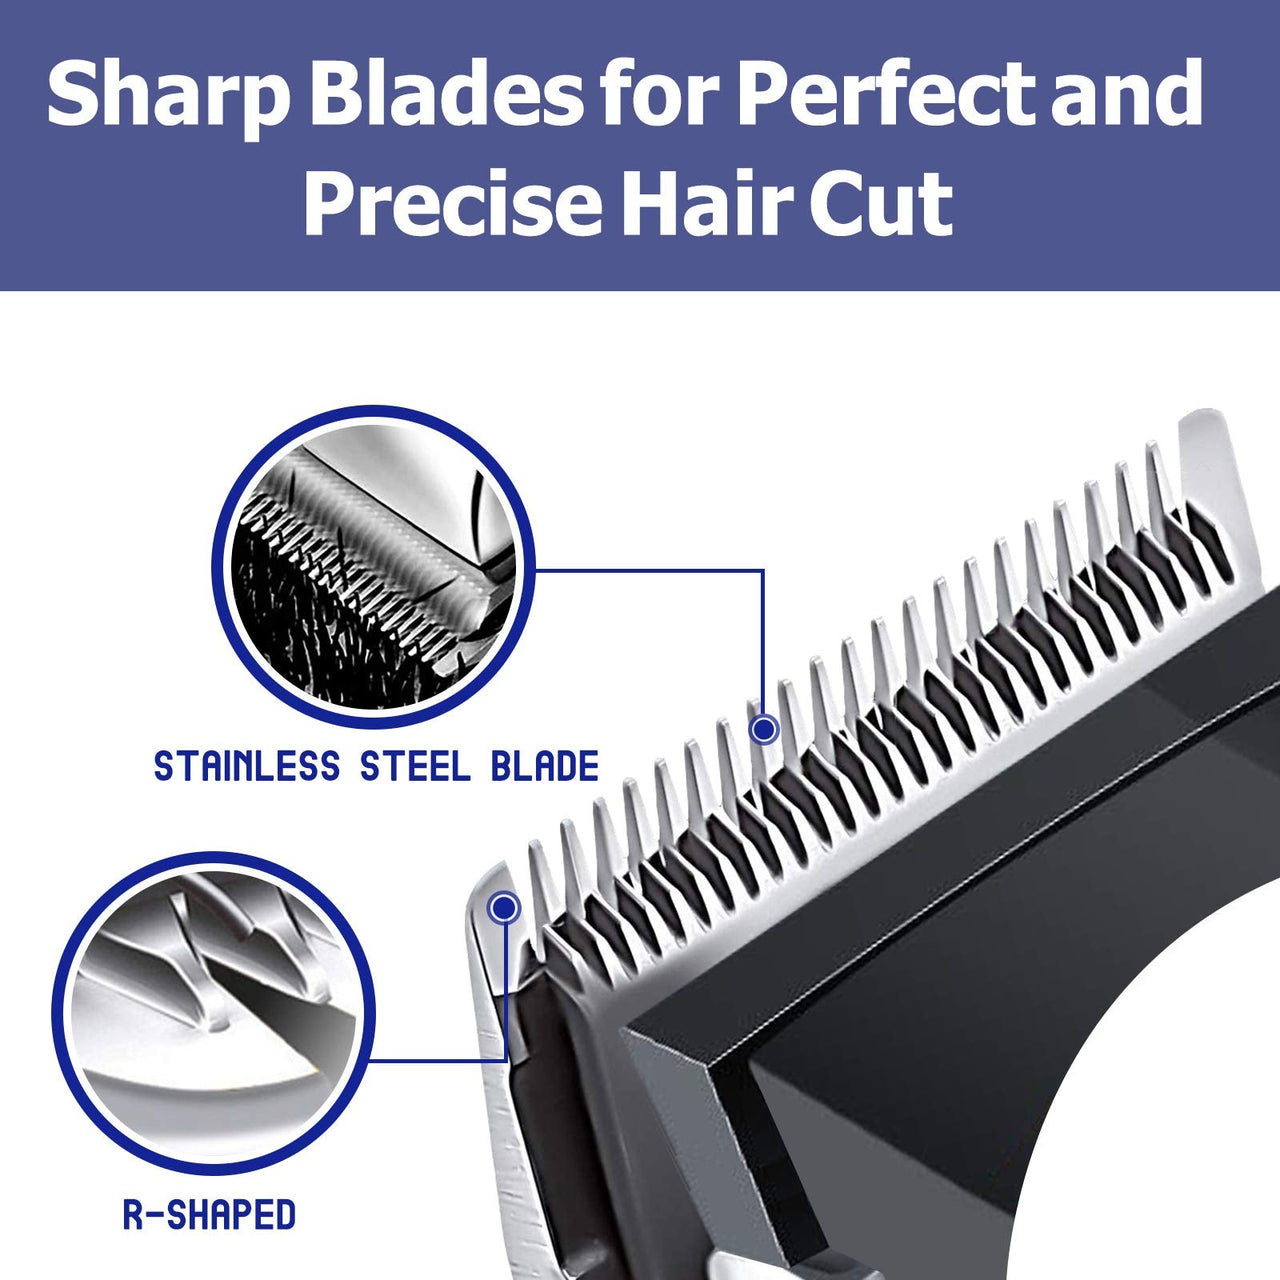 Professional Hair Clippers, Corded Hair Clippers for Men, Kids, Strong Motor Barber Salon Complete Hair and Beard, Clipping and Trimming Kit - InspiredGrabs.com